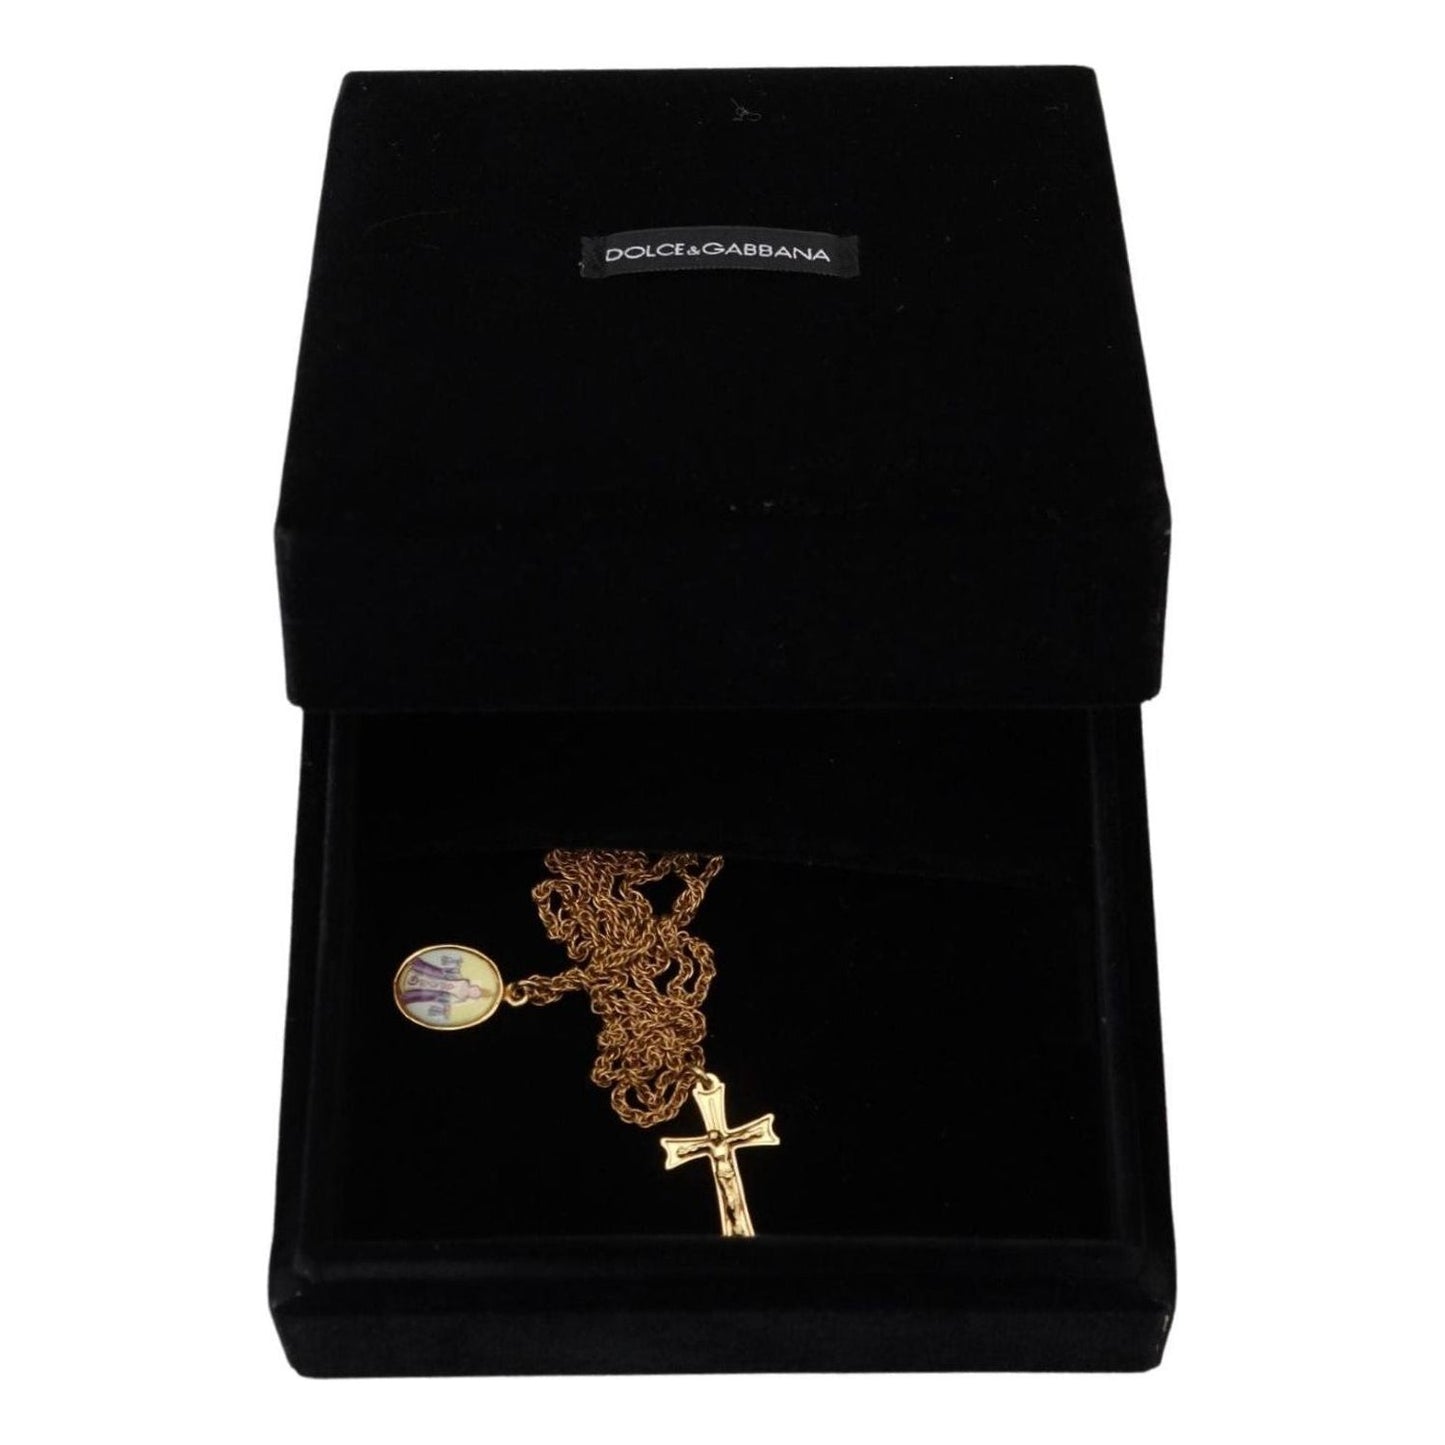 Dolce & Gabbana Elegant Gold Tone Charm Necklace with Cross Pendant gold-brass-chain-religious-cross-pendant-charm-necklace WOMAN NECKLACE IMG_4237-c52e4710-098.jpg